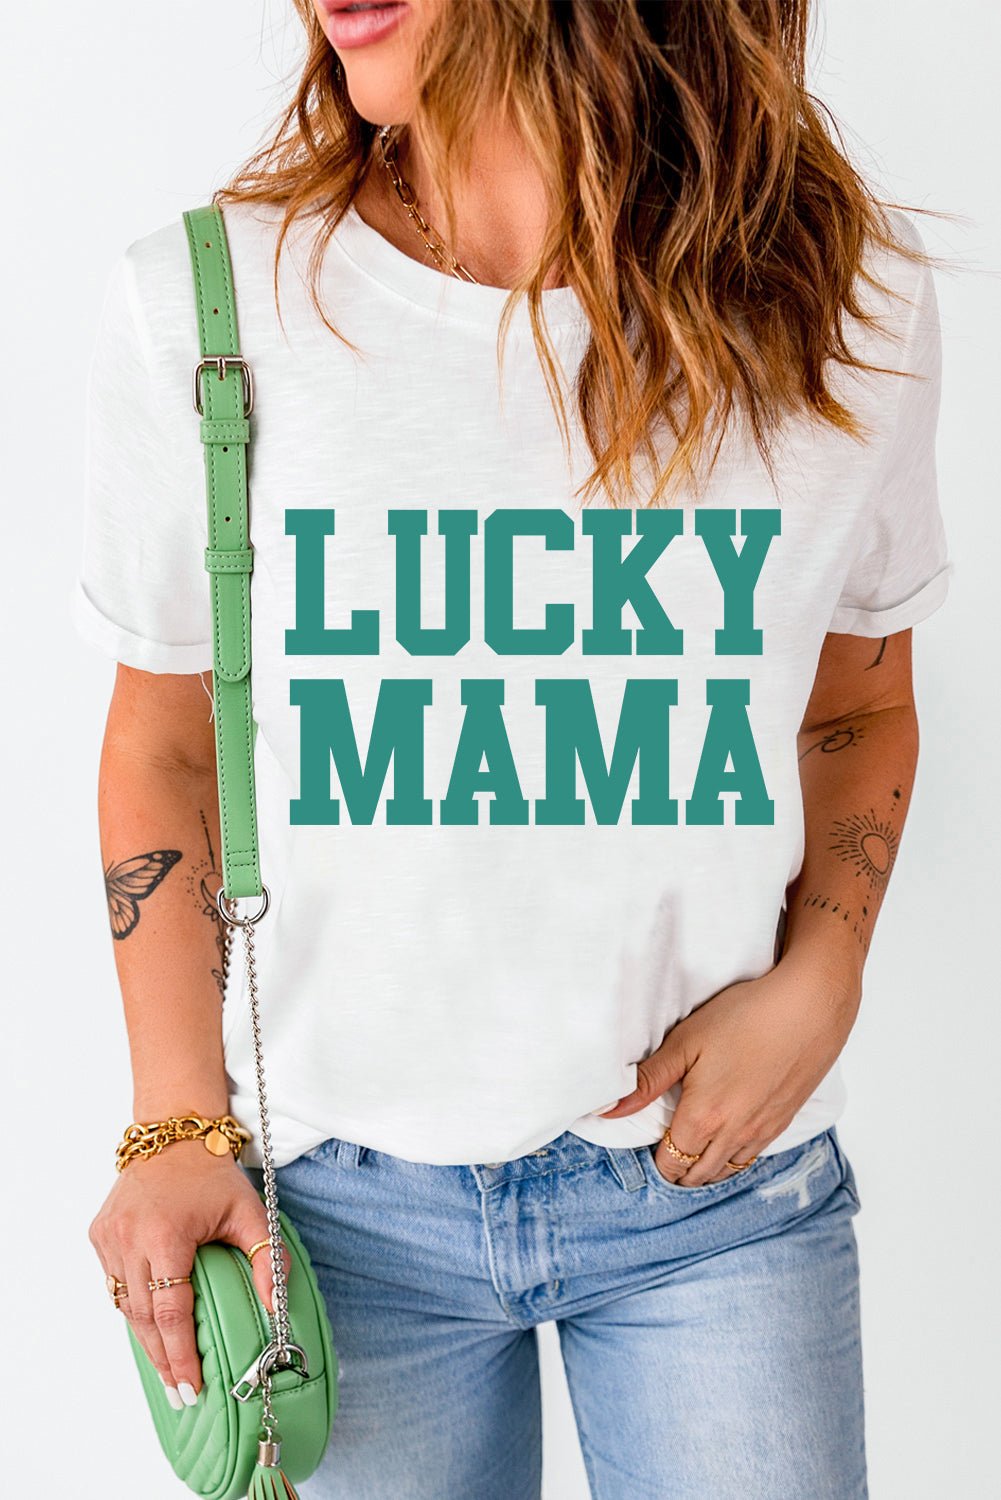 "Lucky Mama - Embrace the Enchantment of Love with this Magical Graphic Tee - Feel Lucky and Radiant Every Day!" - Guy Christopher